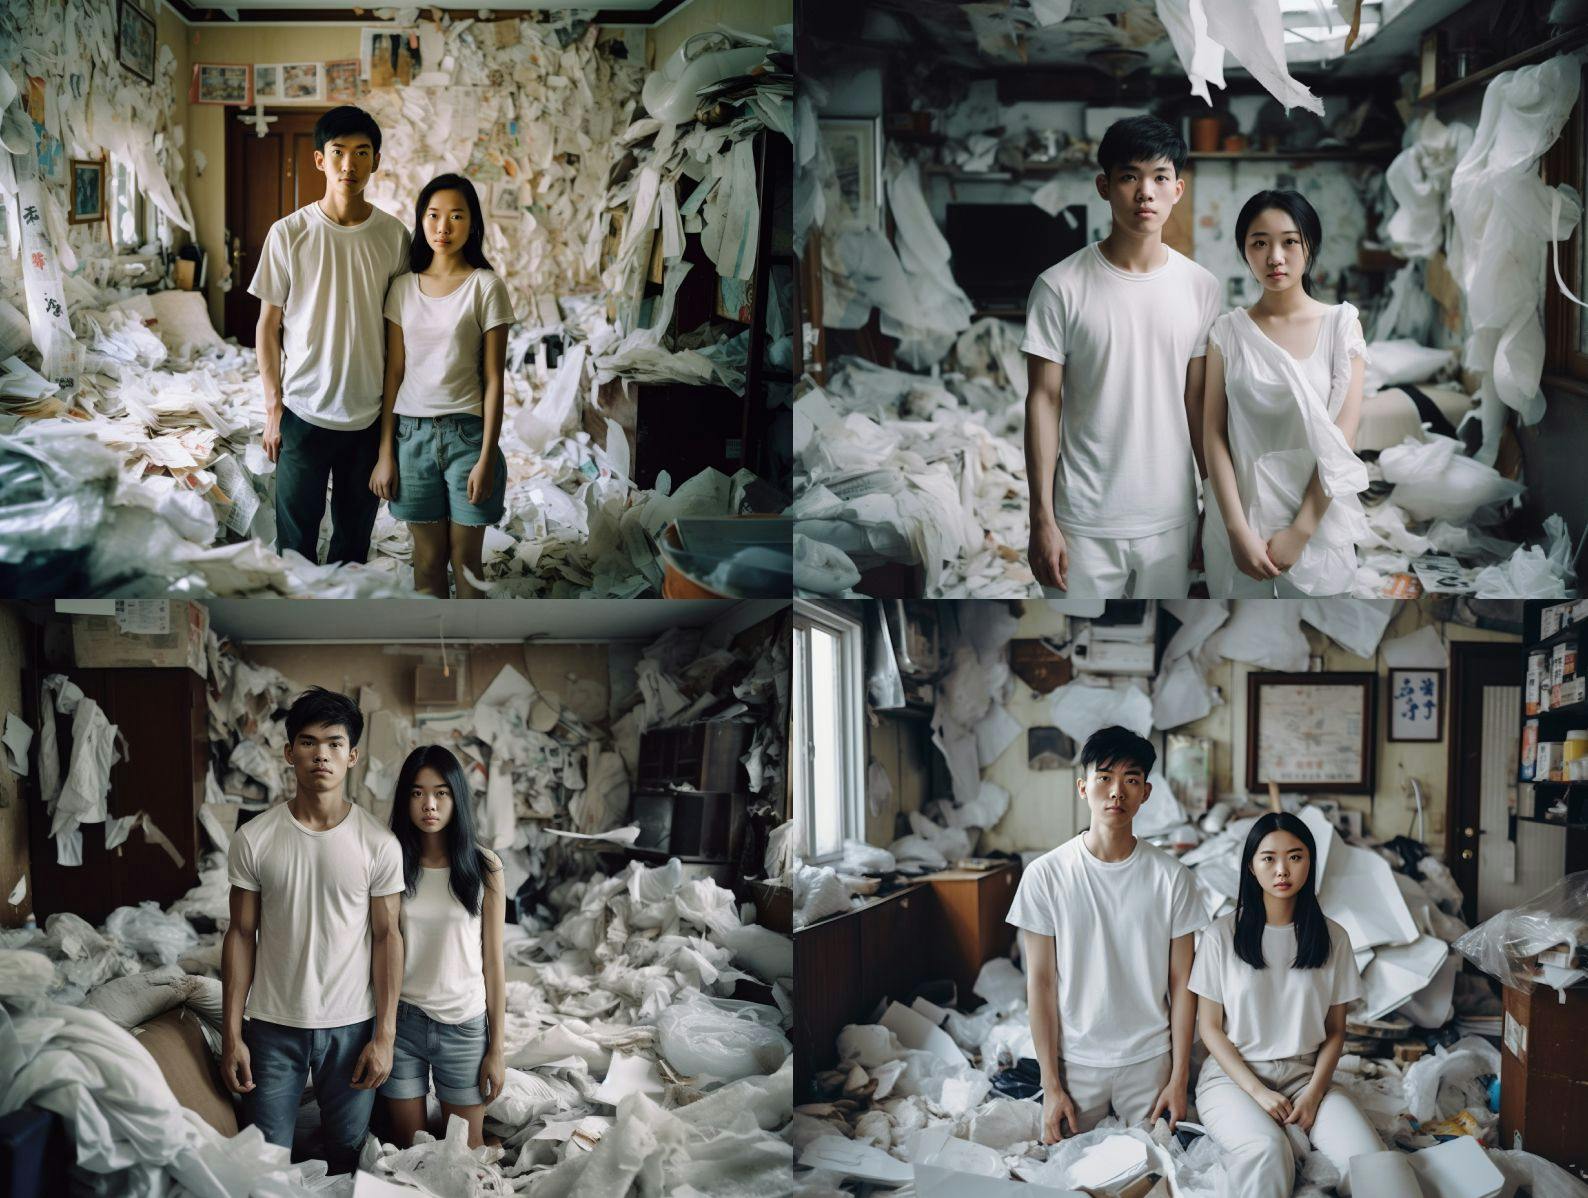 Photograph from 2018s China showing a young couple in their 20s, dressed in white, stands in their home filled with white plastic trash bags and torn white paper rolls.